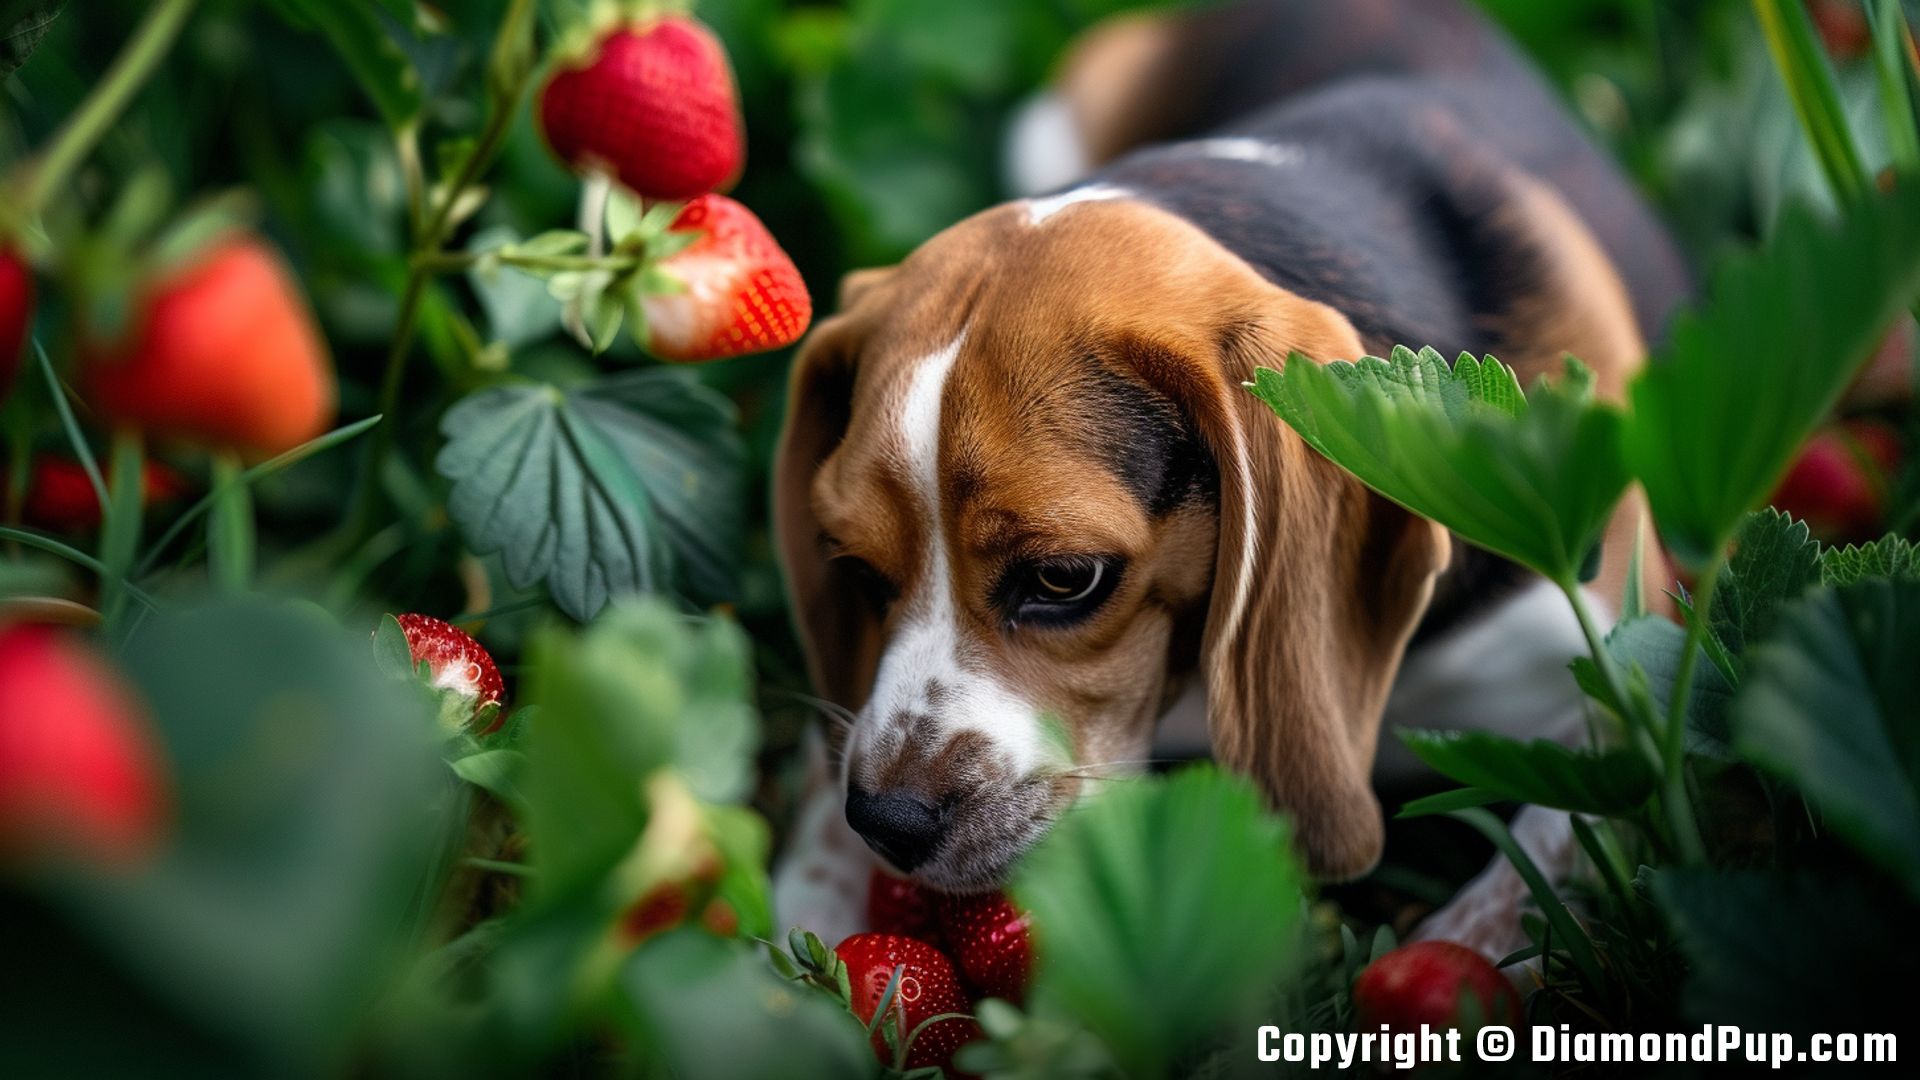 Image of a Playful Beagle Snacking on Strawberries